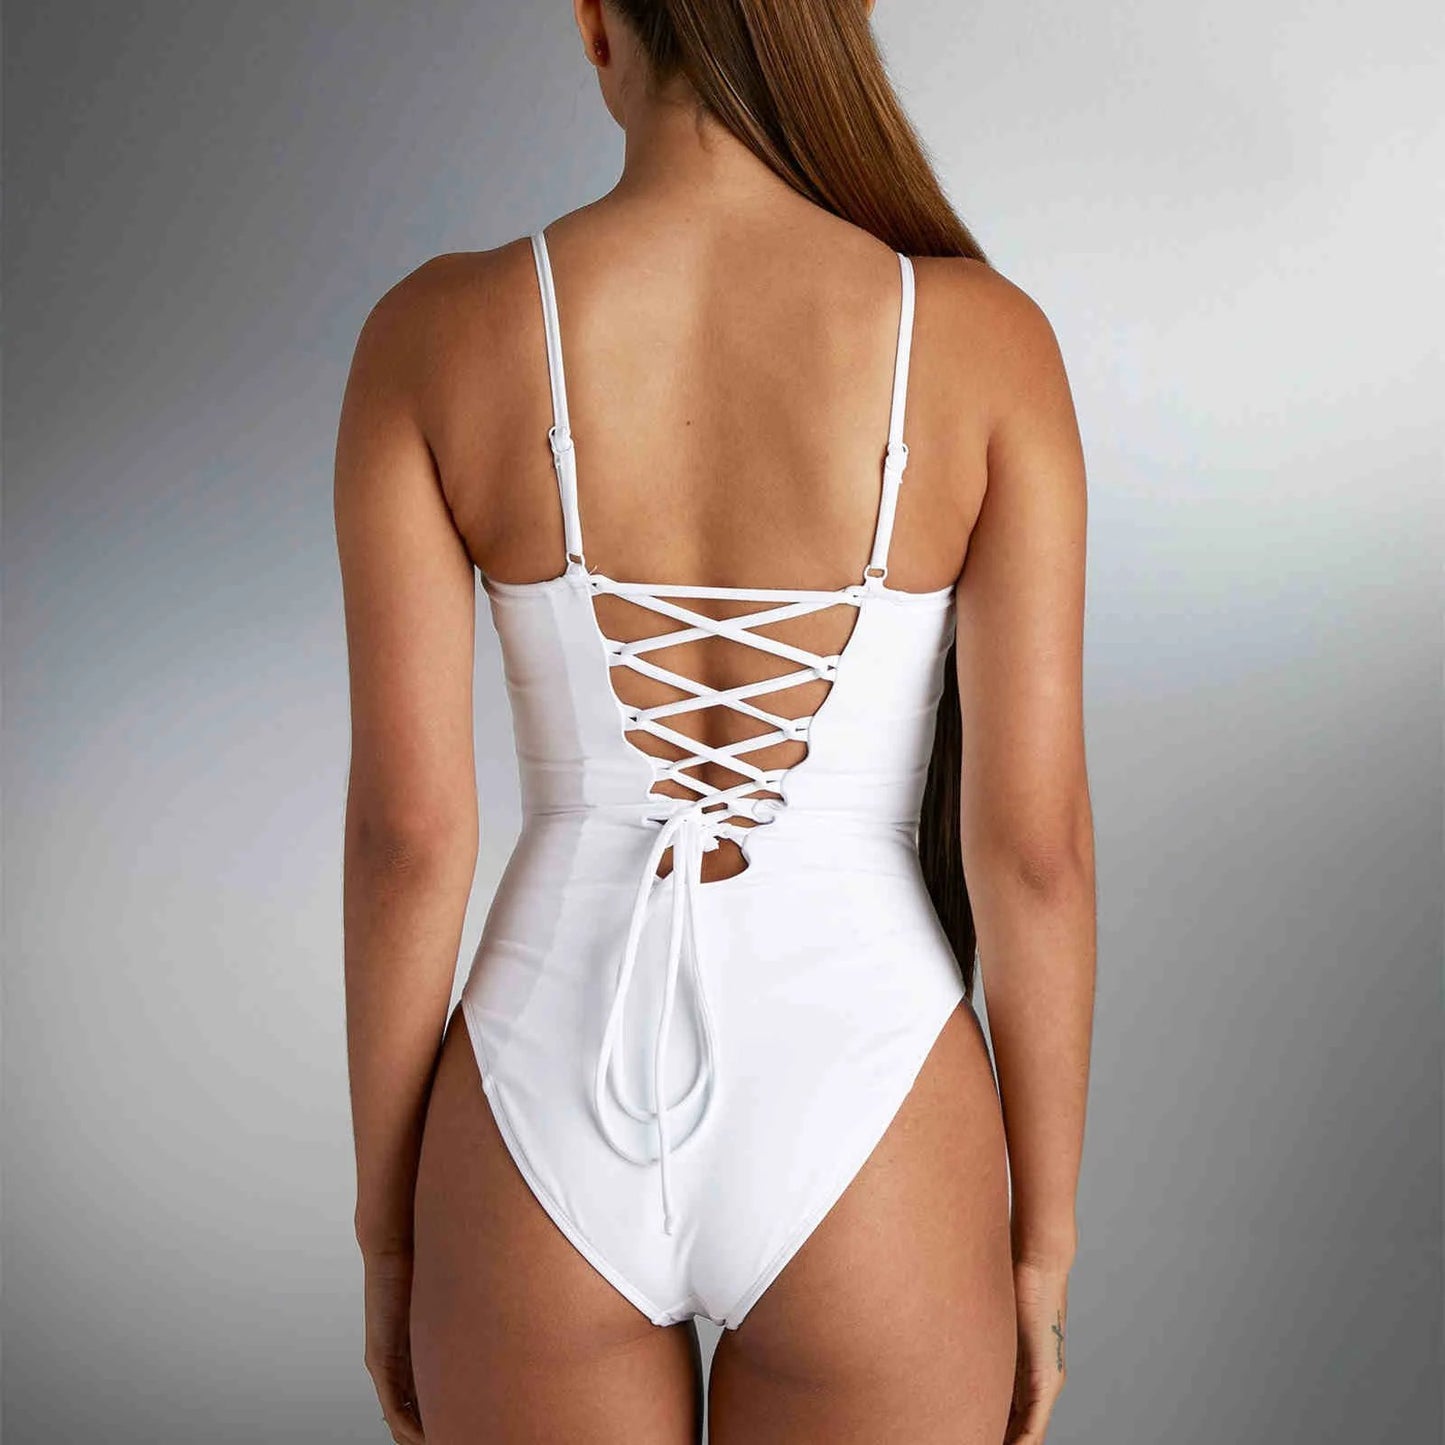 🎁Sculpting Corset Swimsuits🎉Buy 2 Free Shipping🎁